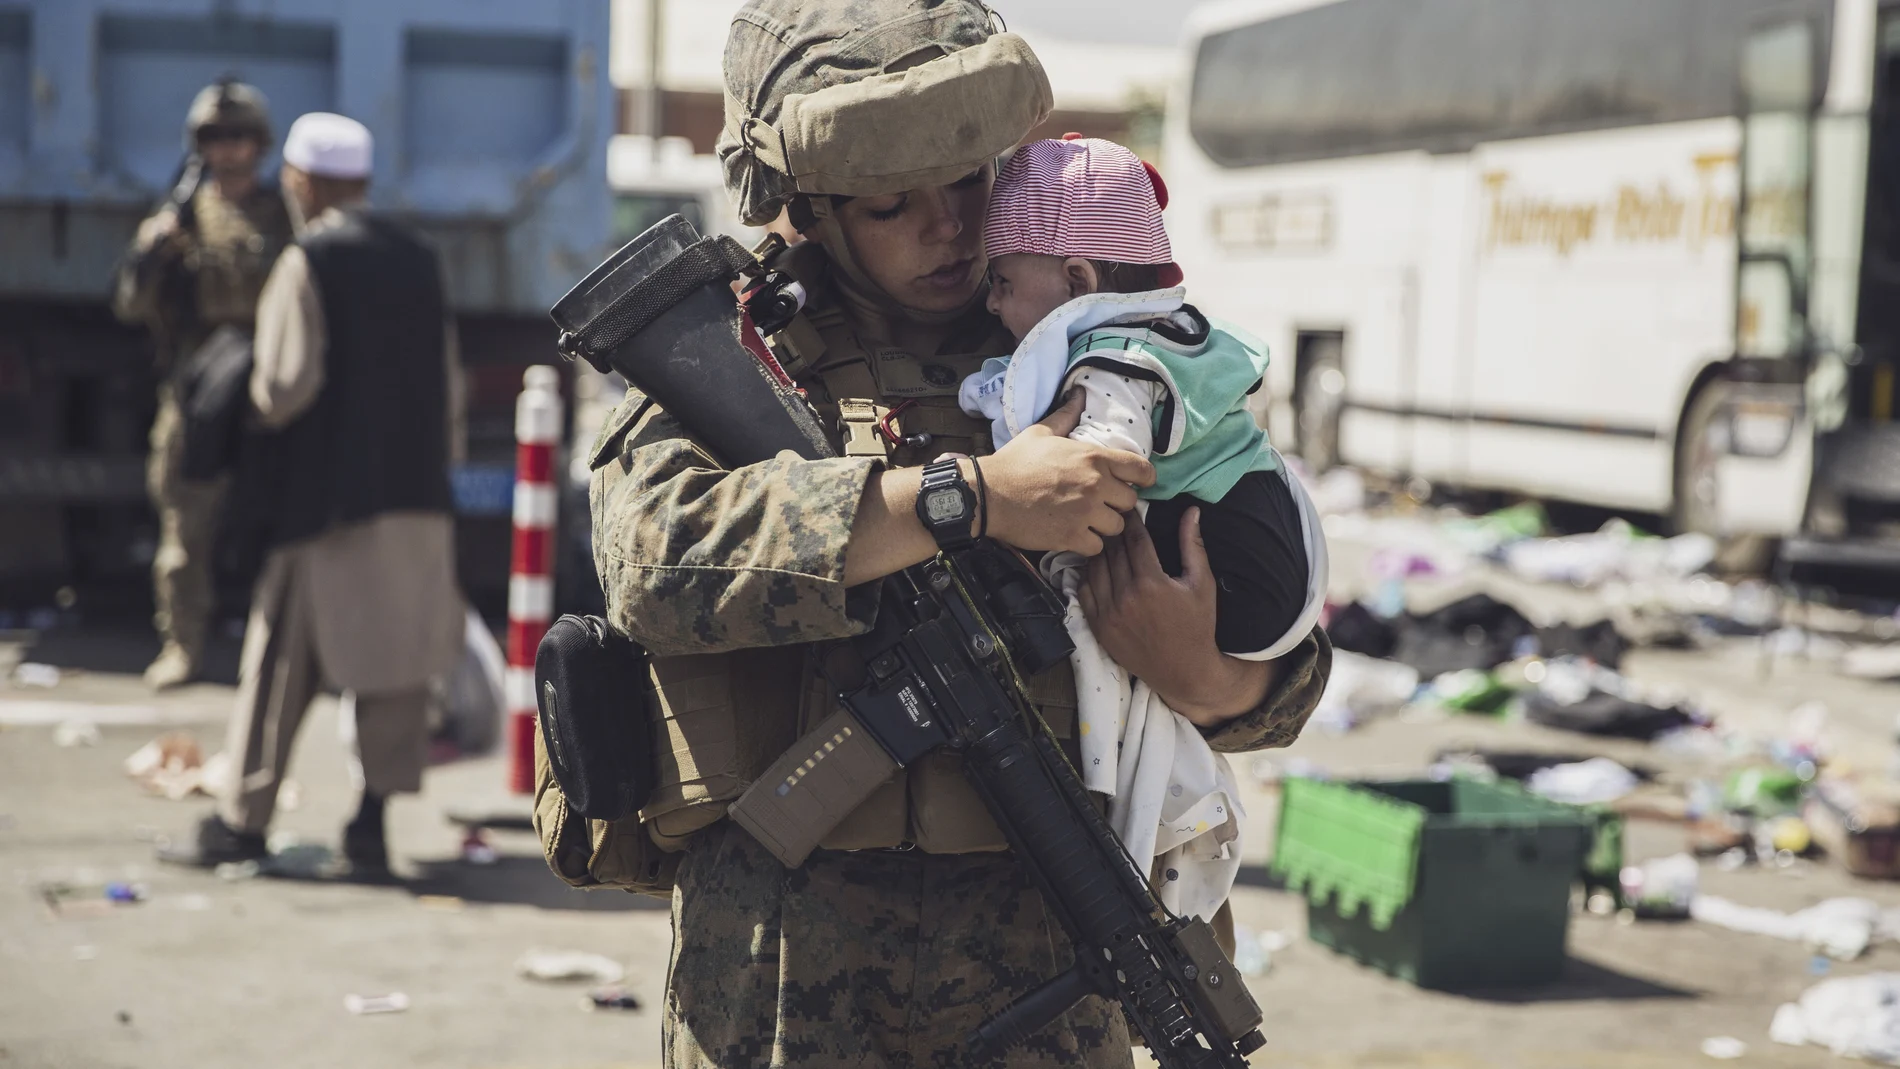 In this image provided by the U.S. Marine Corps, a Marine with the 24th Marine Expeditionary Unit (MEU) carries a baby as the family processes through the evacuation control center at Hamid Karzai International Airport in Kabul, Afghanistan, Saturday, Aug. 28, 2021. (Staff Sgt. Victor Mancilla/U.S. Marine Corps via AP)